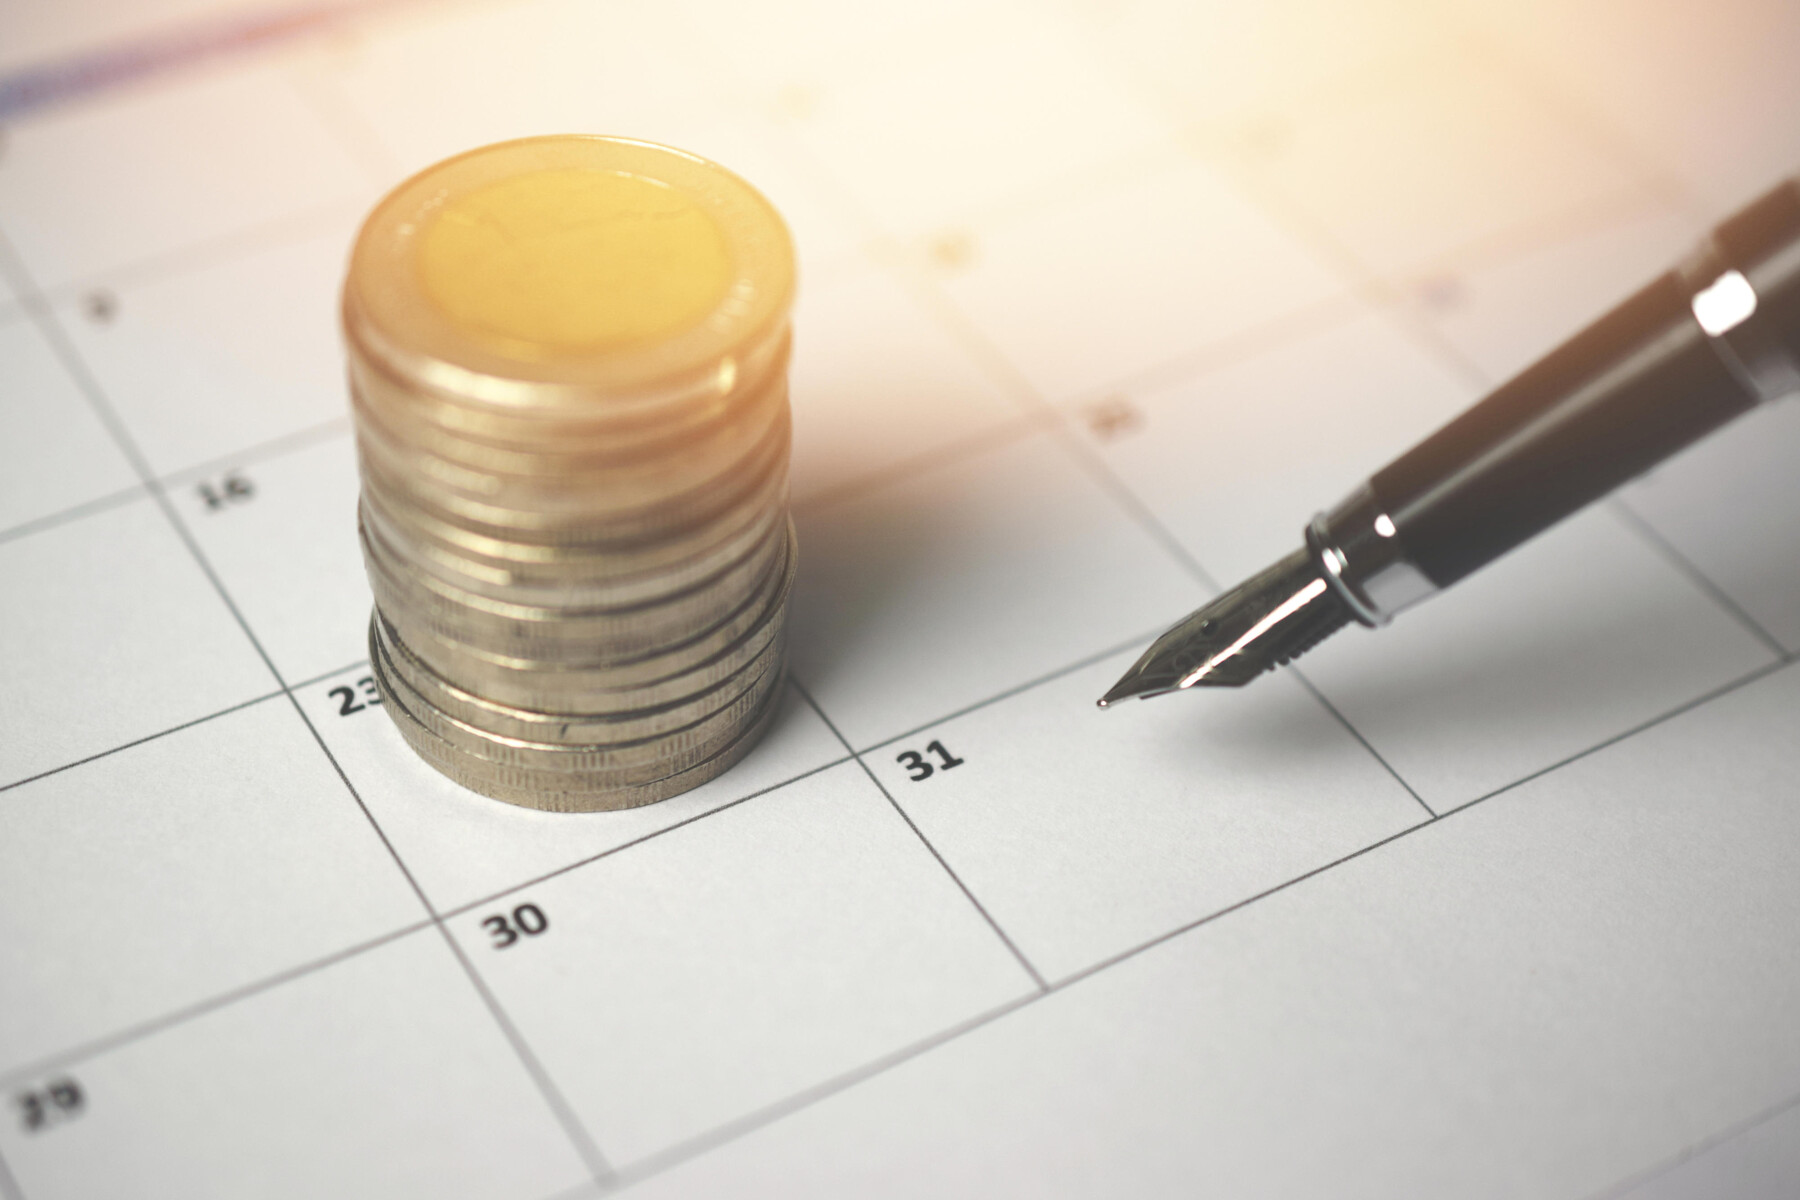 Stay informed with the KSB financial calendar